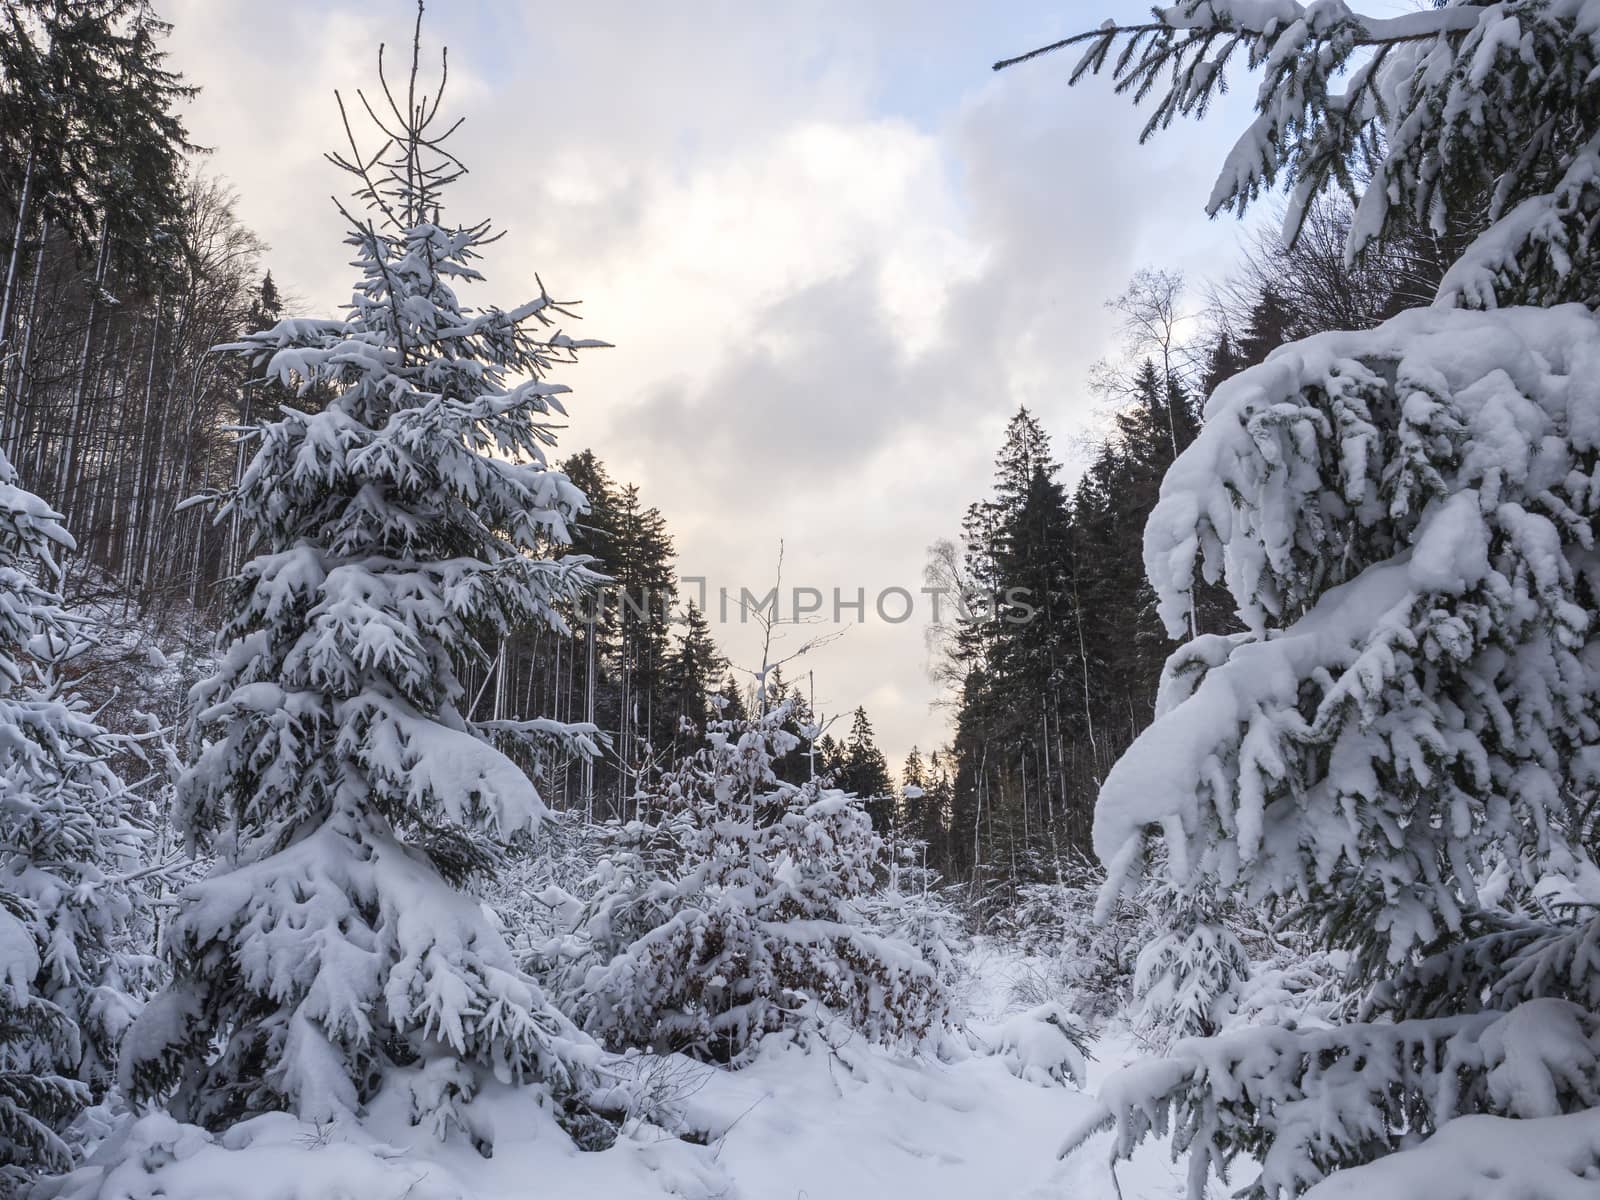 snow covered forest landscape with snowy fir and spruce trees, branches, idyllic winter landscape in golden hour sun light.